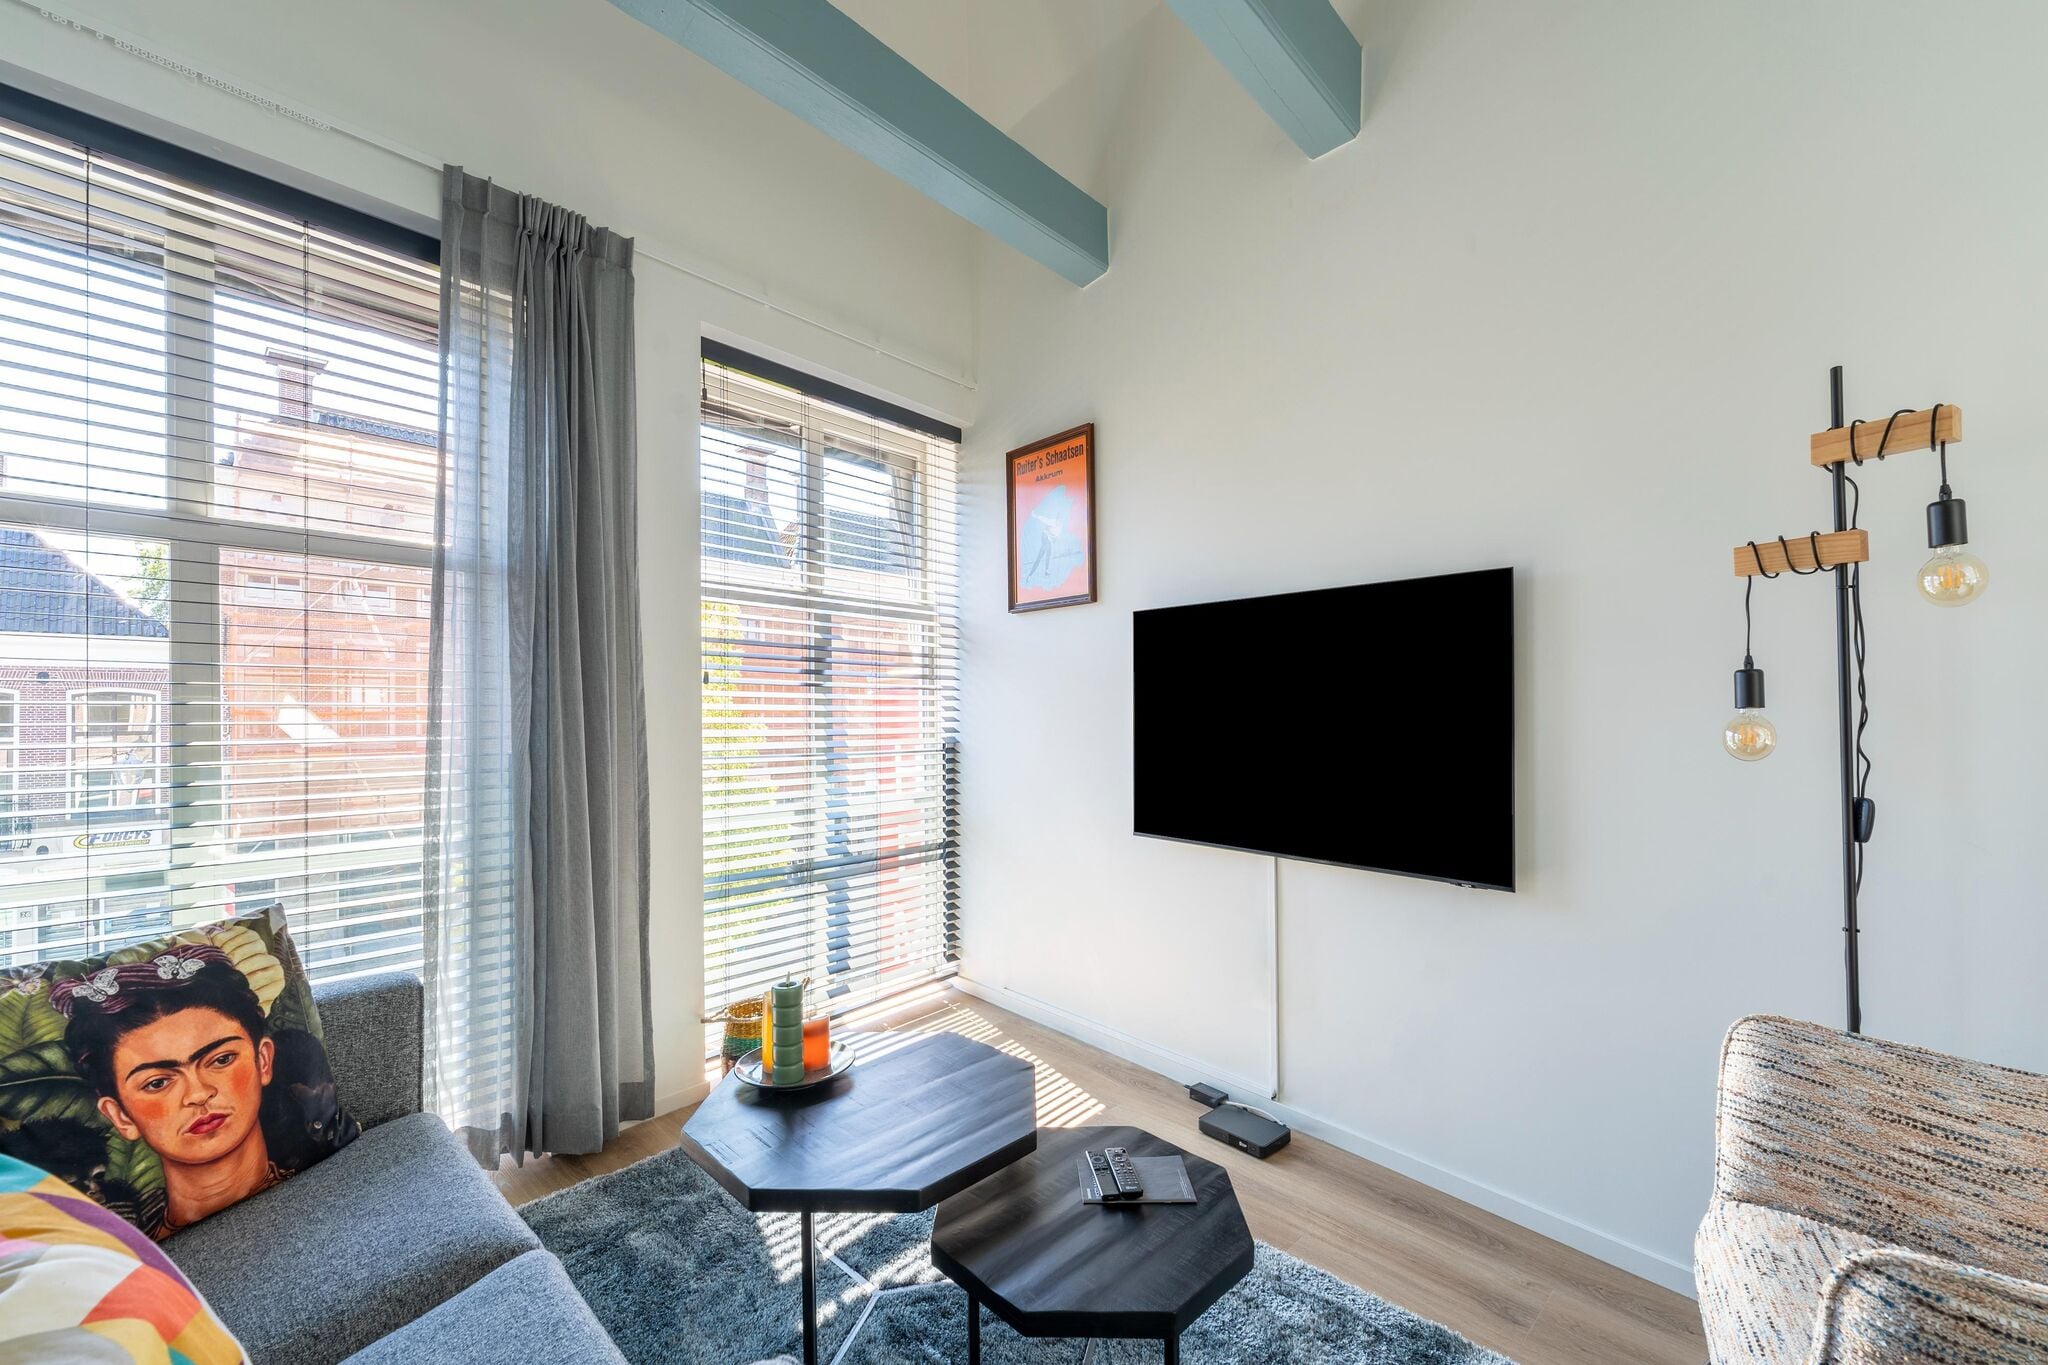 Cozy apartment in the heart of Sneek